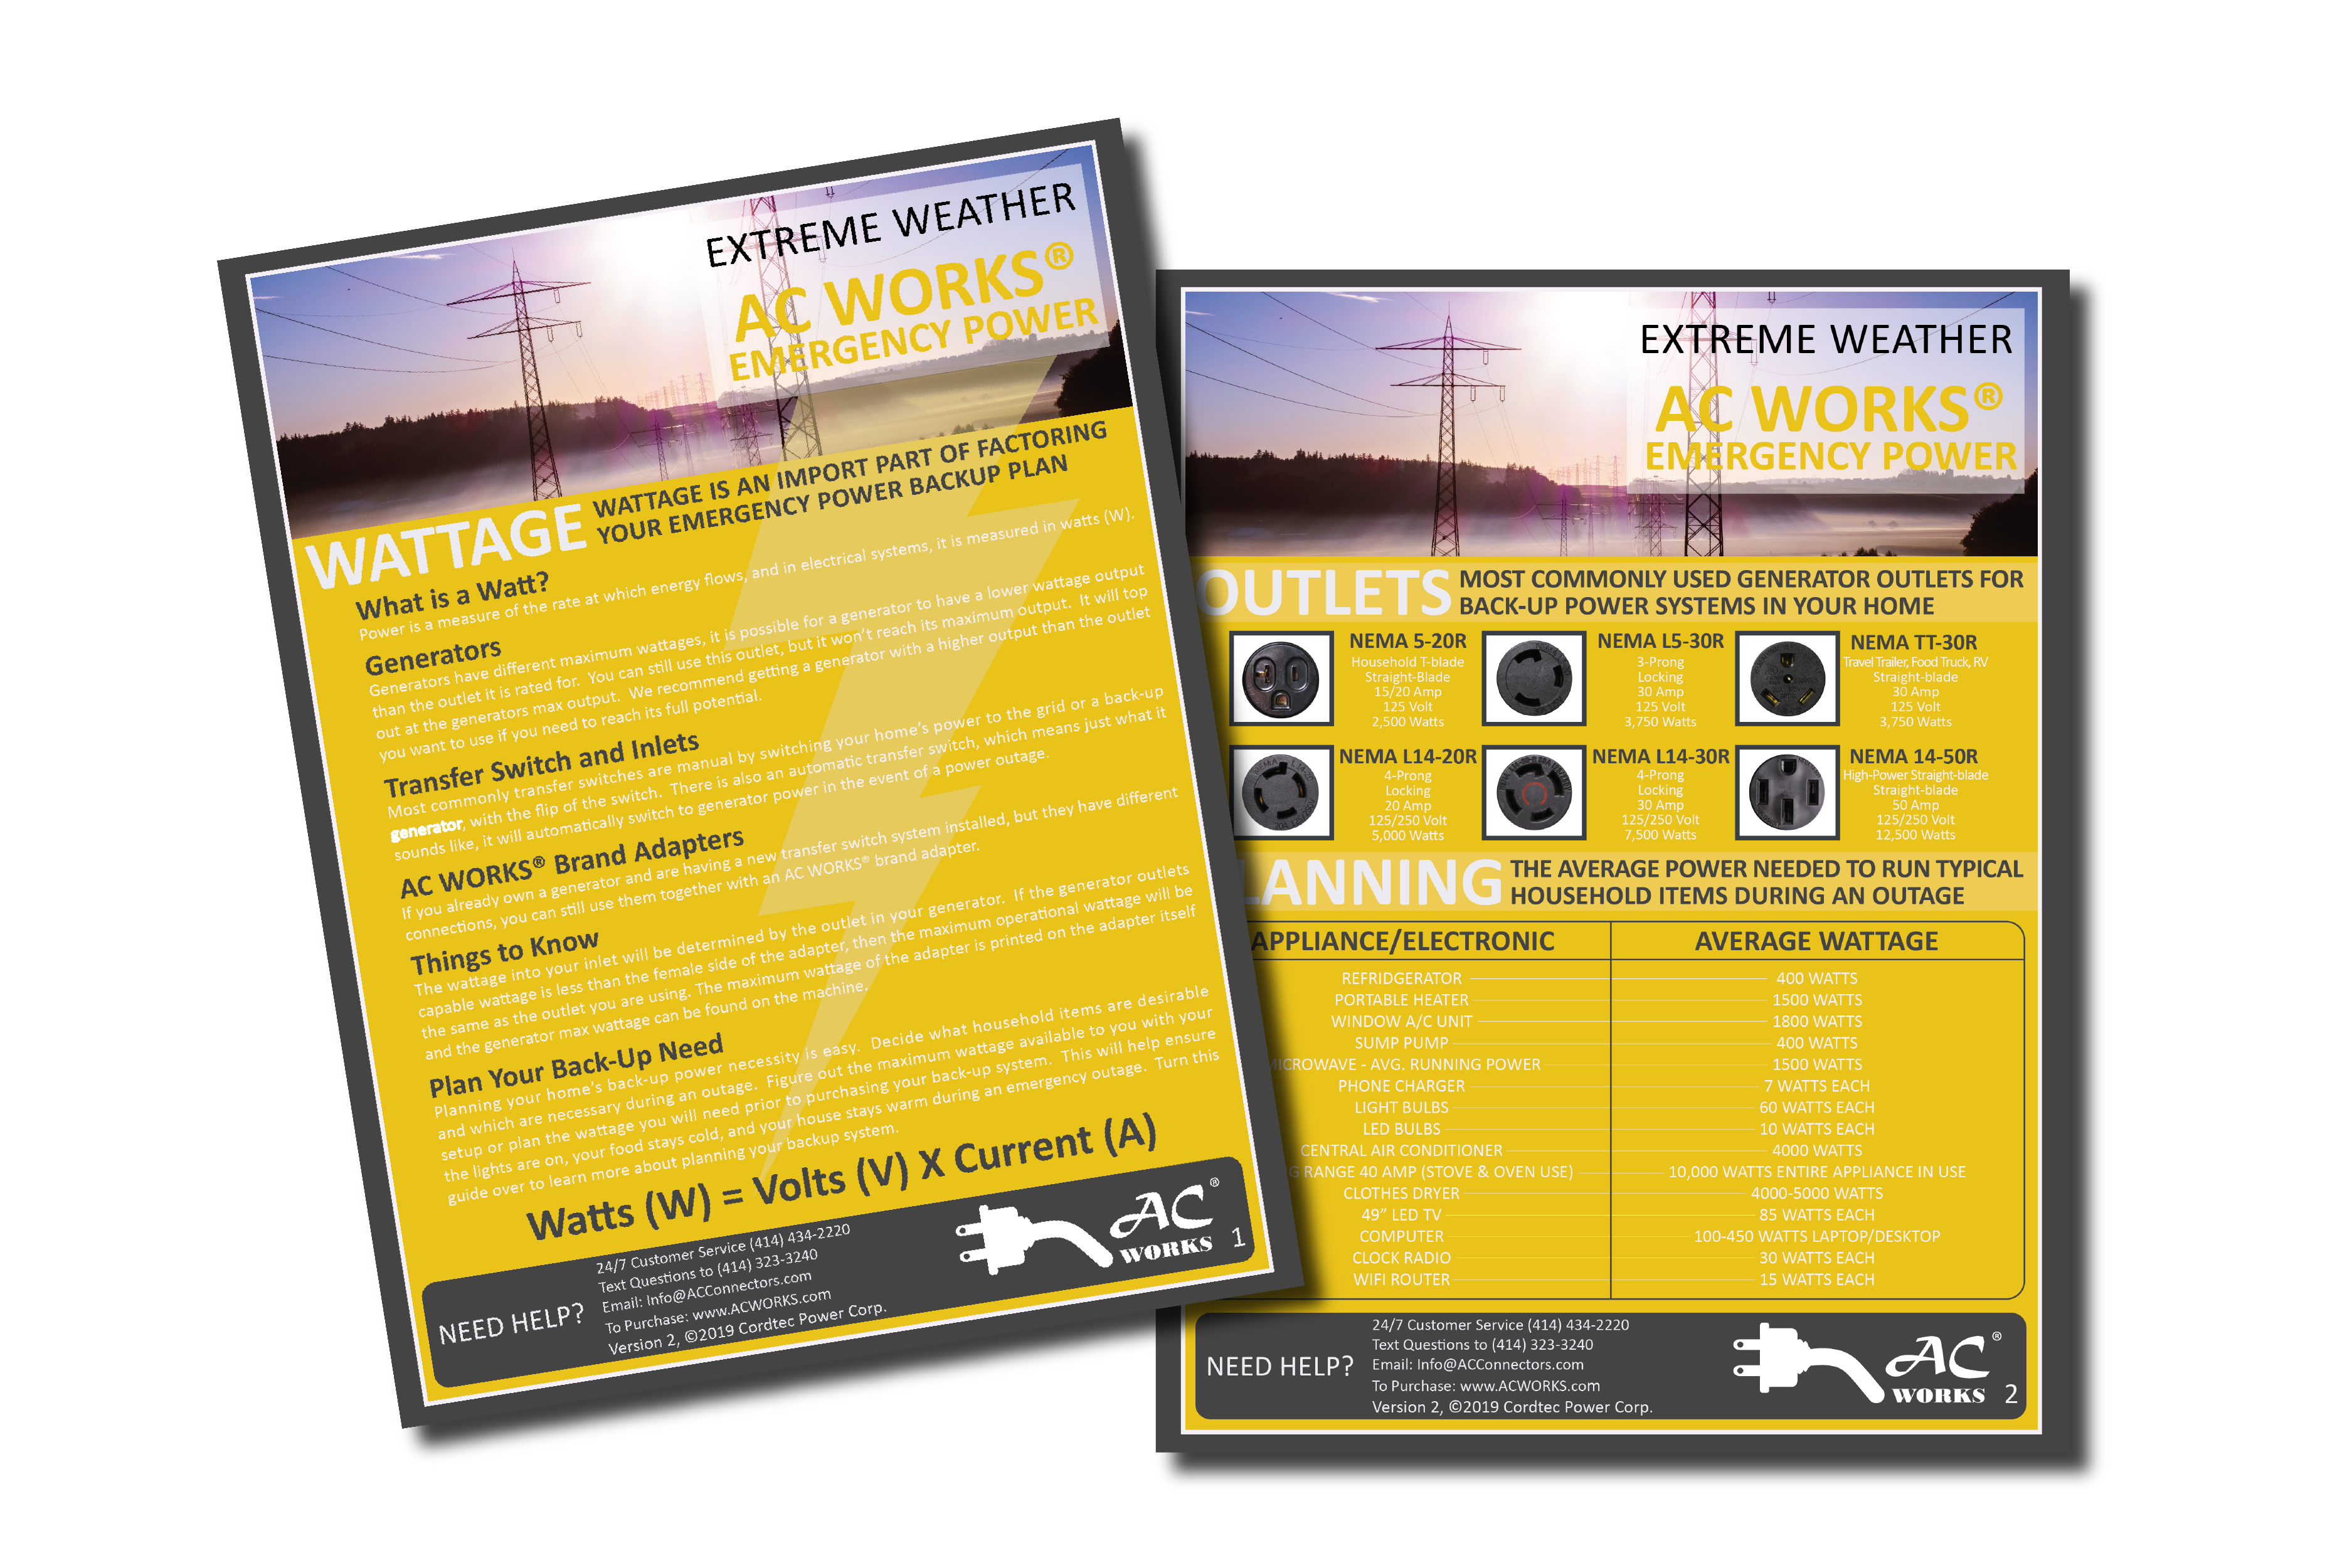 Download the Emergency Power Guide by AC WORKS®